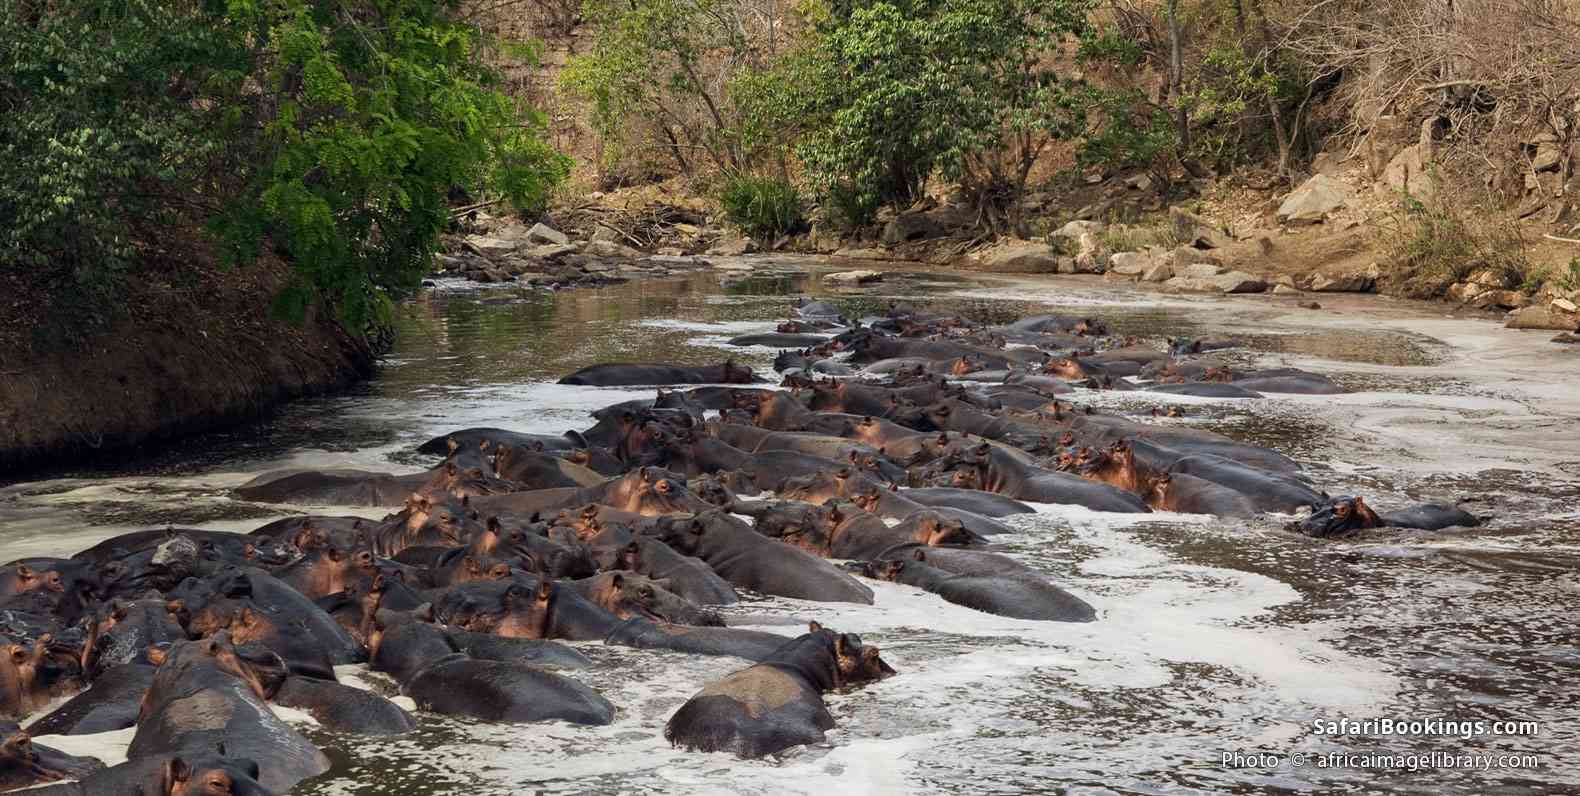 Hippos in Nyerere National Park